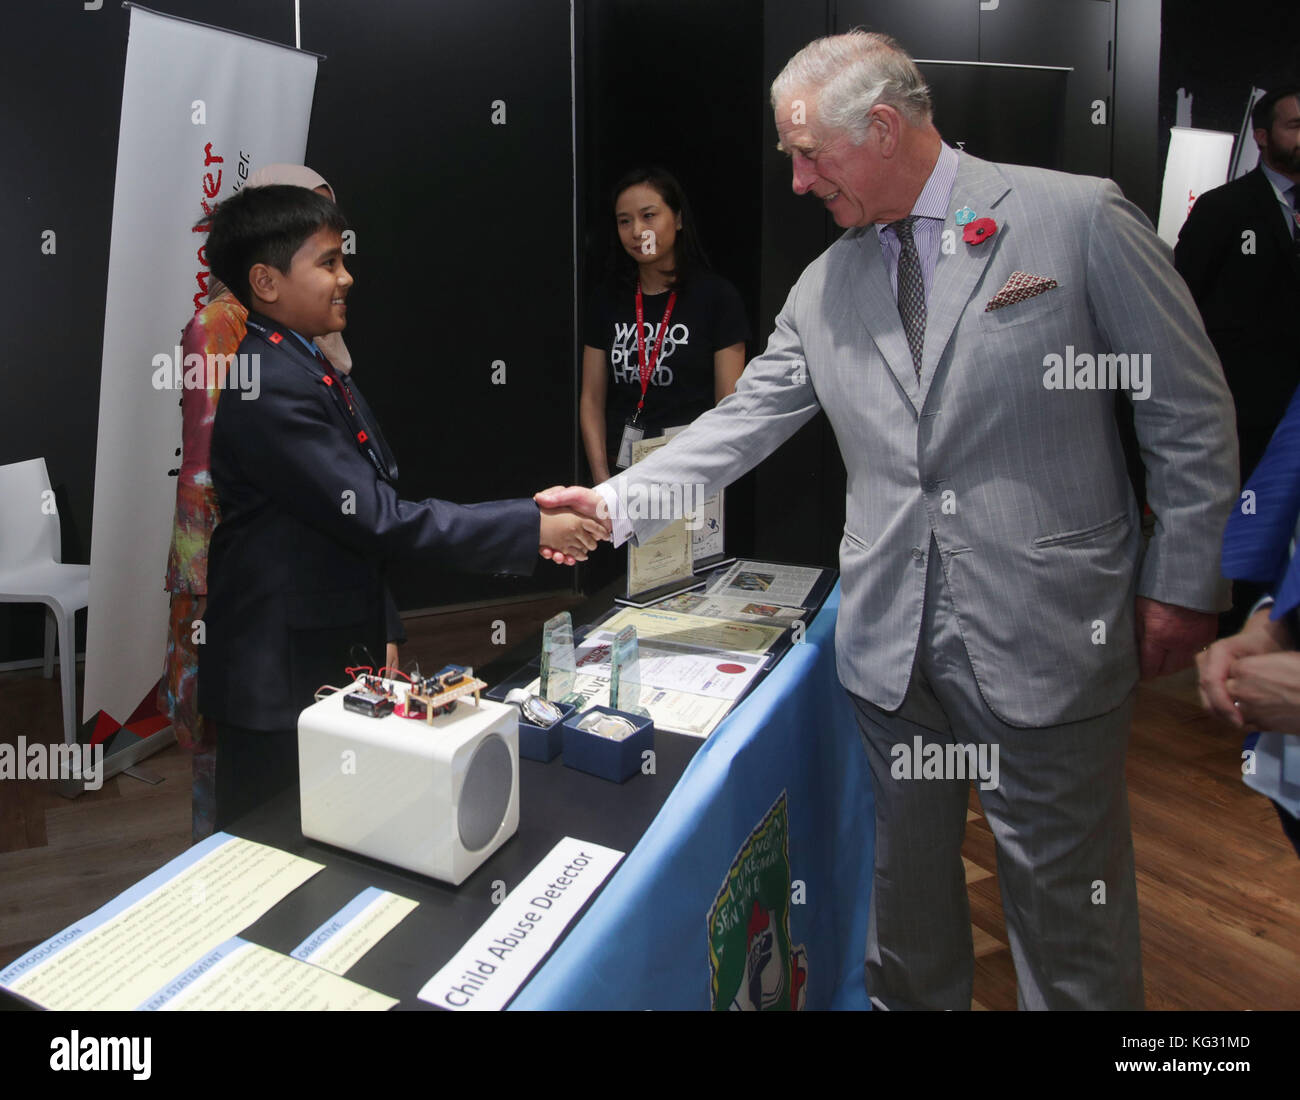 The Prince of Wales meets 12-year-old Ariff Almir Ali with his 'child abuse detector' device, at a tour of MyDigitalMaker Student Showcase during his visit to Worq Co-working space for Young Entrepreneurs, in Kuala Lumpur, Malaysia. Stock Photo